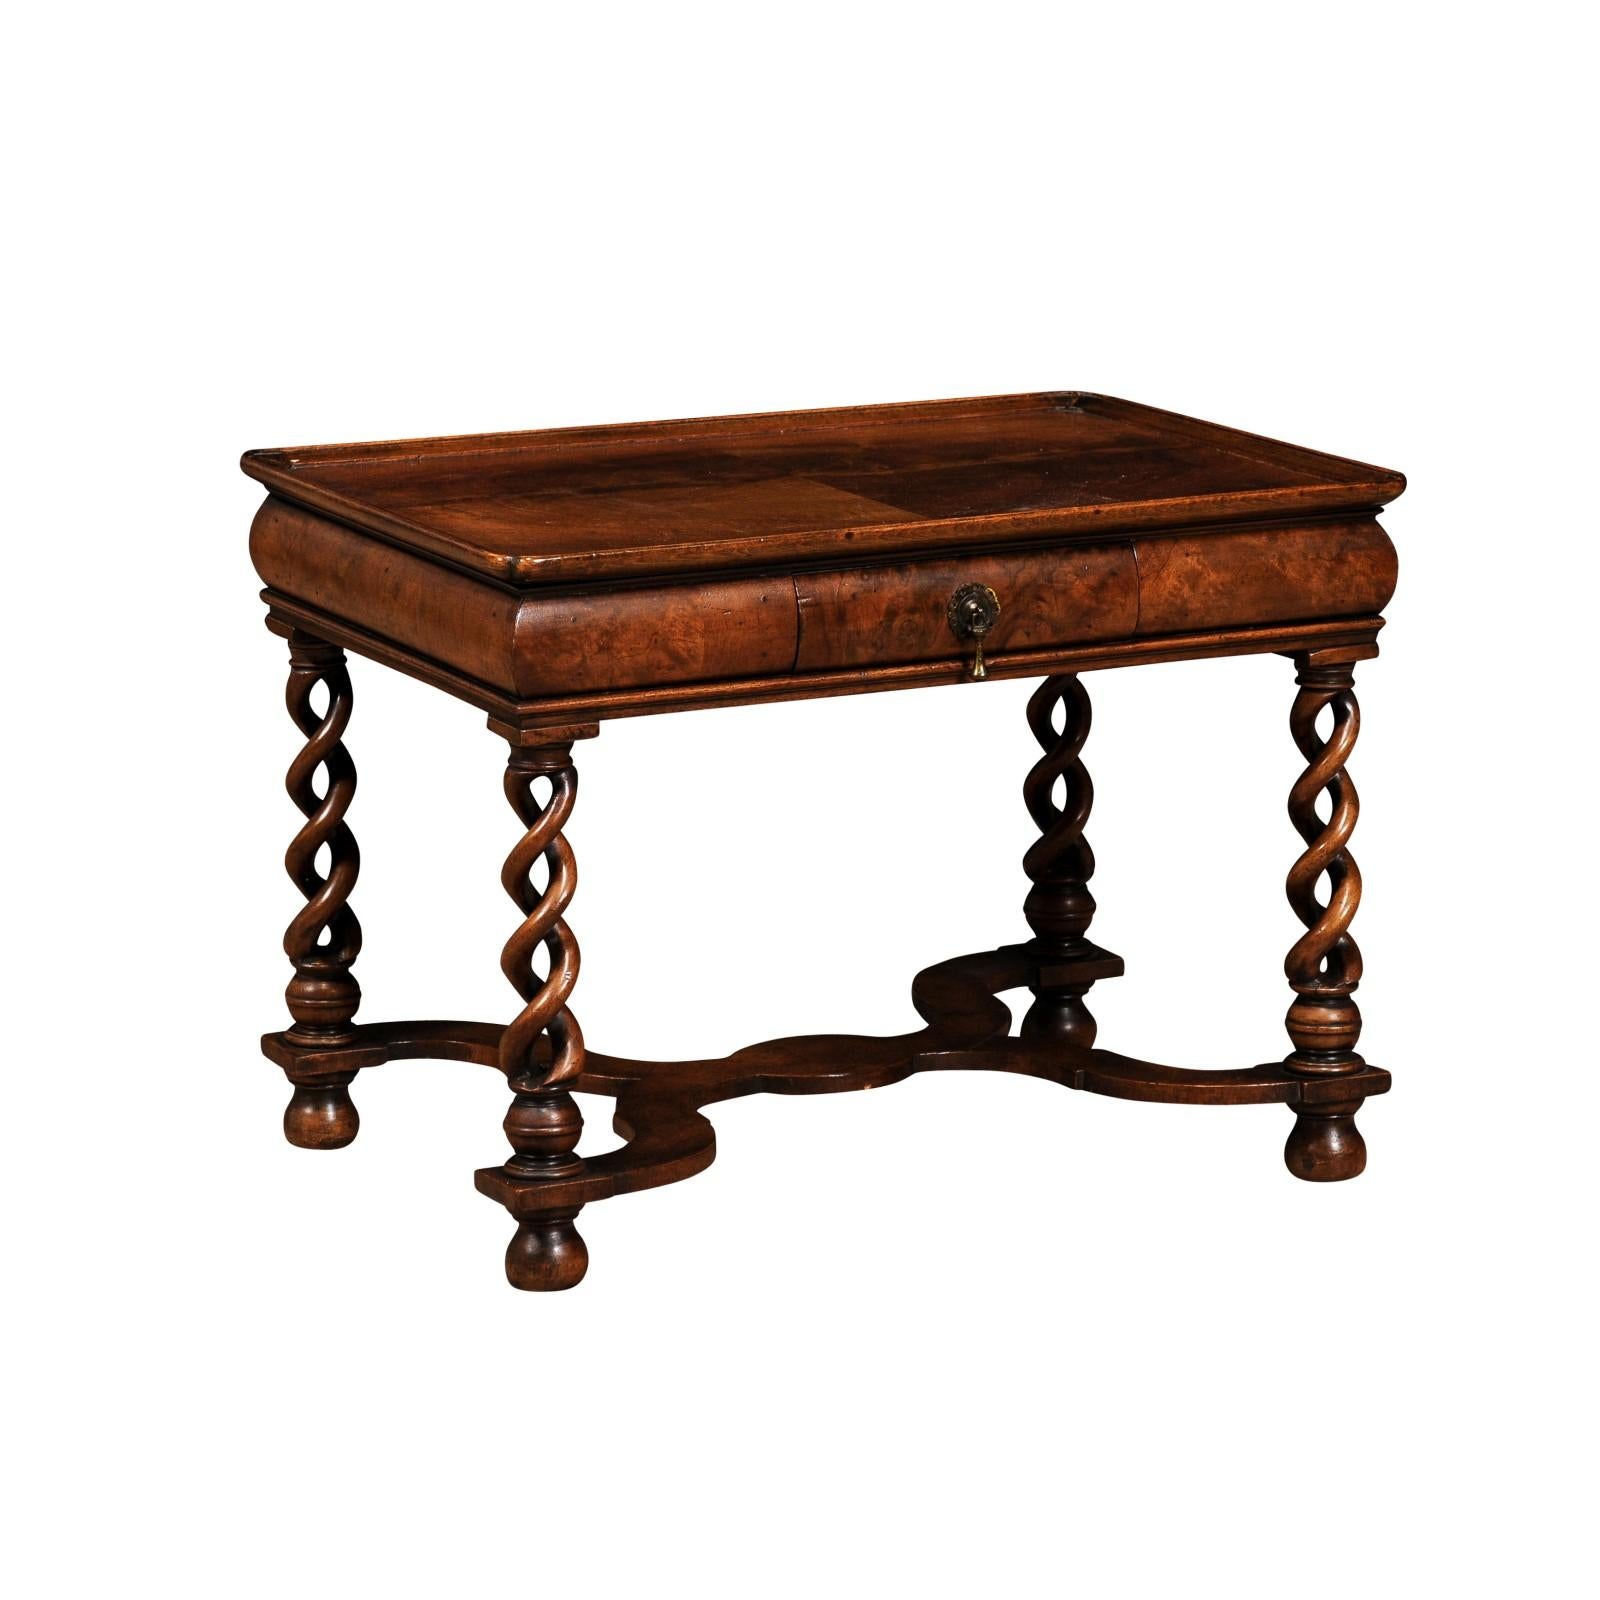 An English Queen Anne style burl walnut coffee table from circa 1910 with bookmatched tray top, carved twisted legs and X-Form cross stretcher. This English Queen Anne style coffee table, dating back to circa 1910, is a marvelous representation of